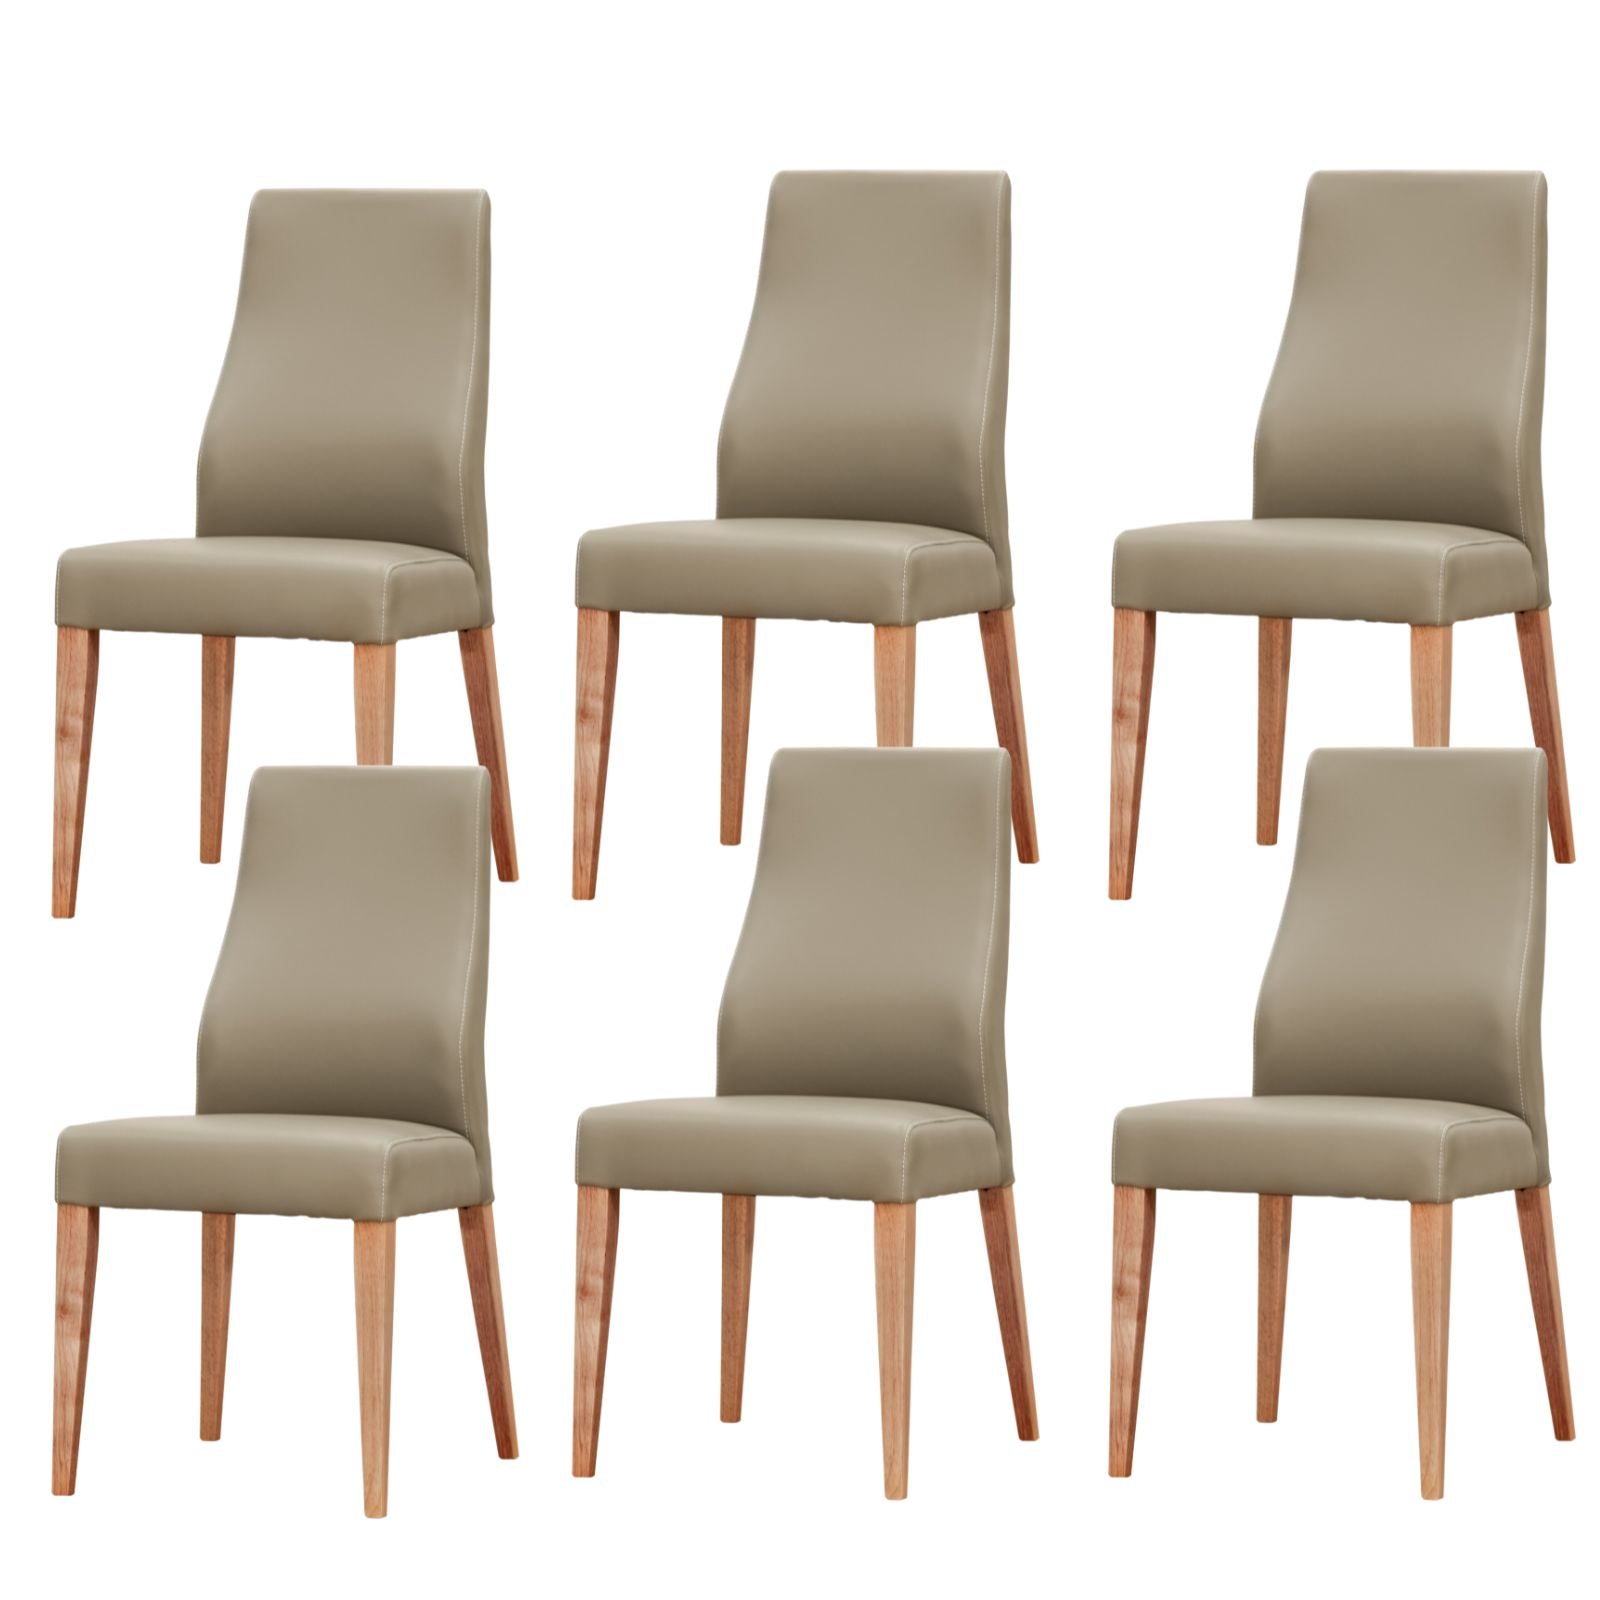 Rosemallow Dining Chair Set of 6 PU Leather Seat Solid Messmate Timber - Silver